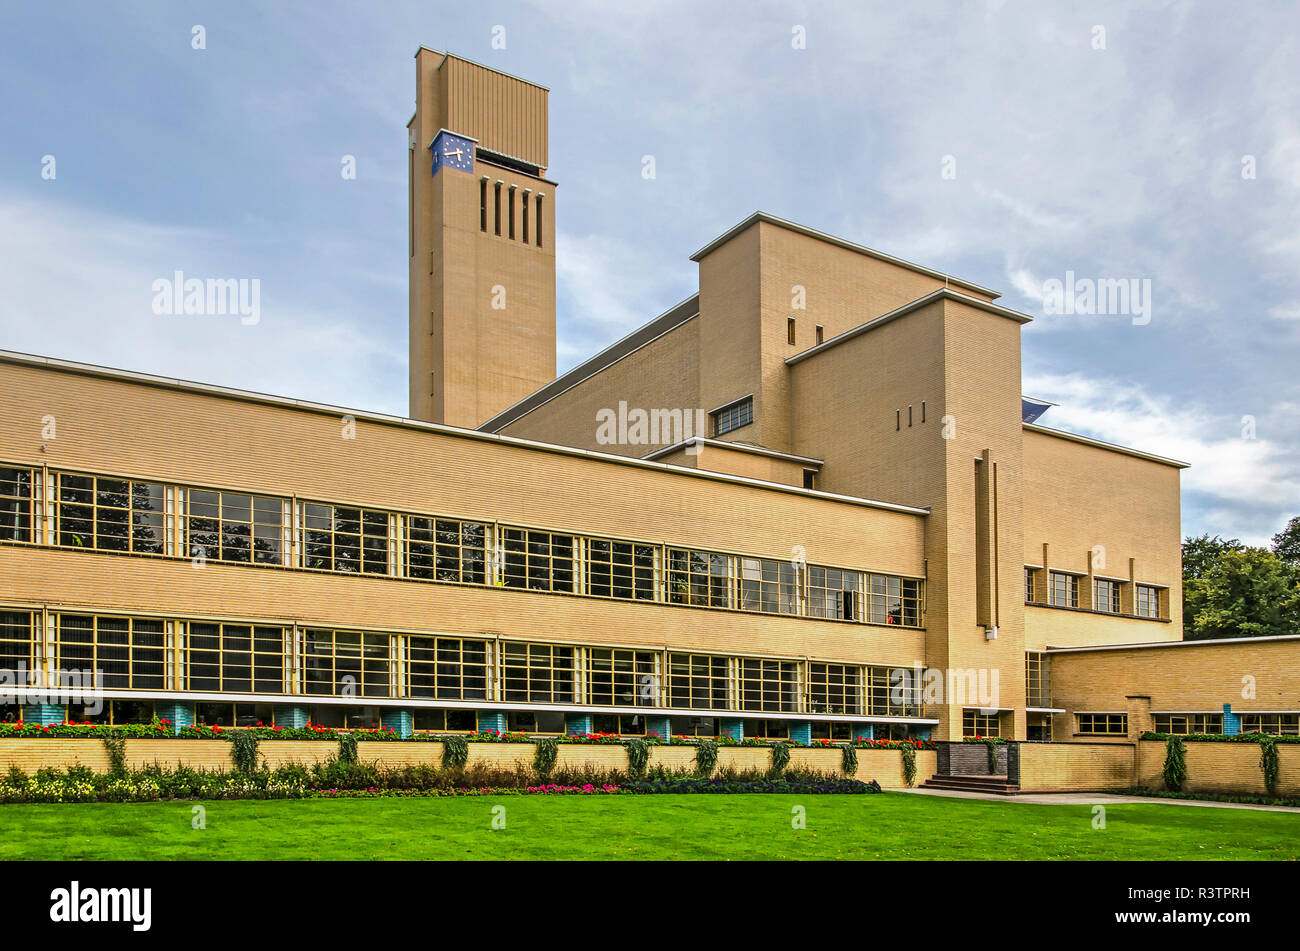 Hilversum, The Netherlands, September 20, 2018: the west facade of the city hall by architect W.M.Dudok (1931) Stock Photo